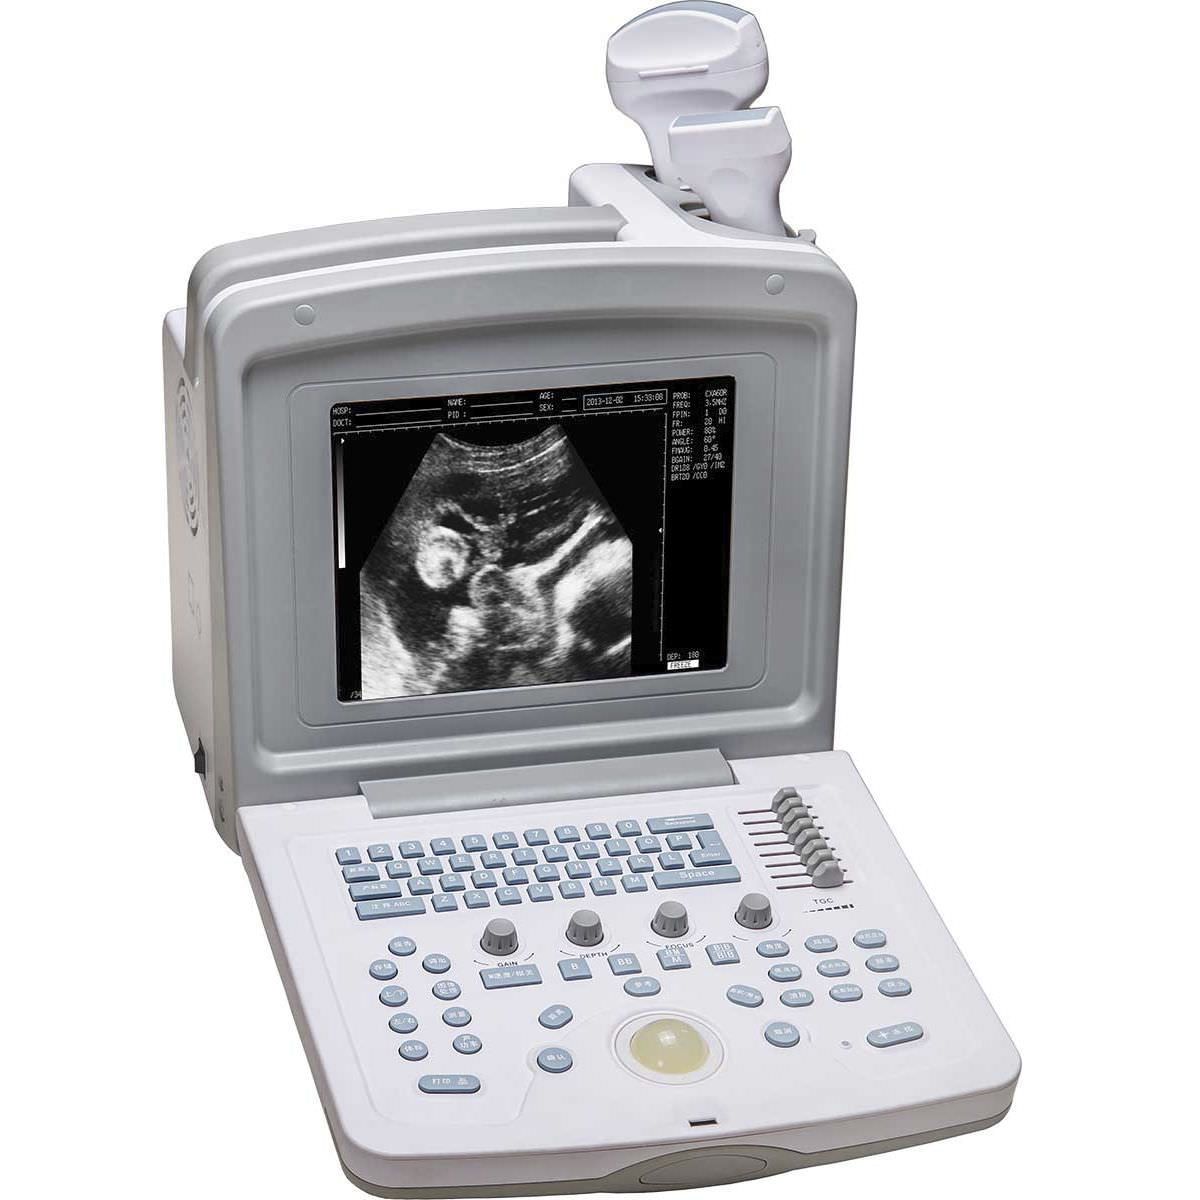 Portable veterinary ultrasound system WED-180V Shenzhen Well.D Medical Electronics